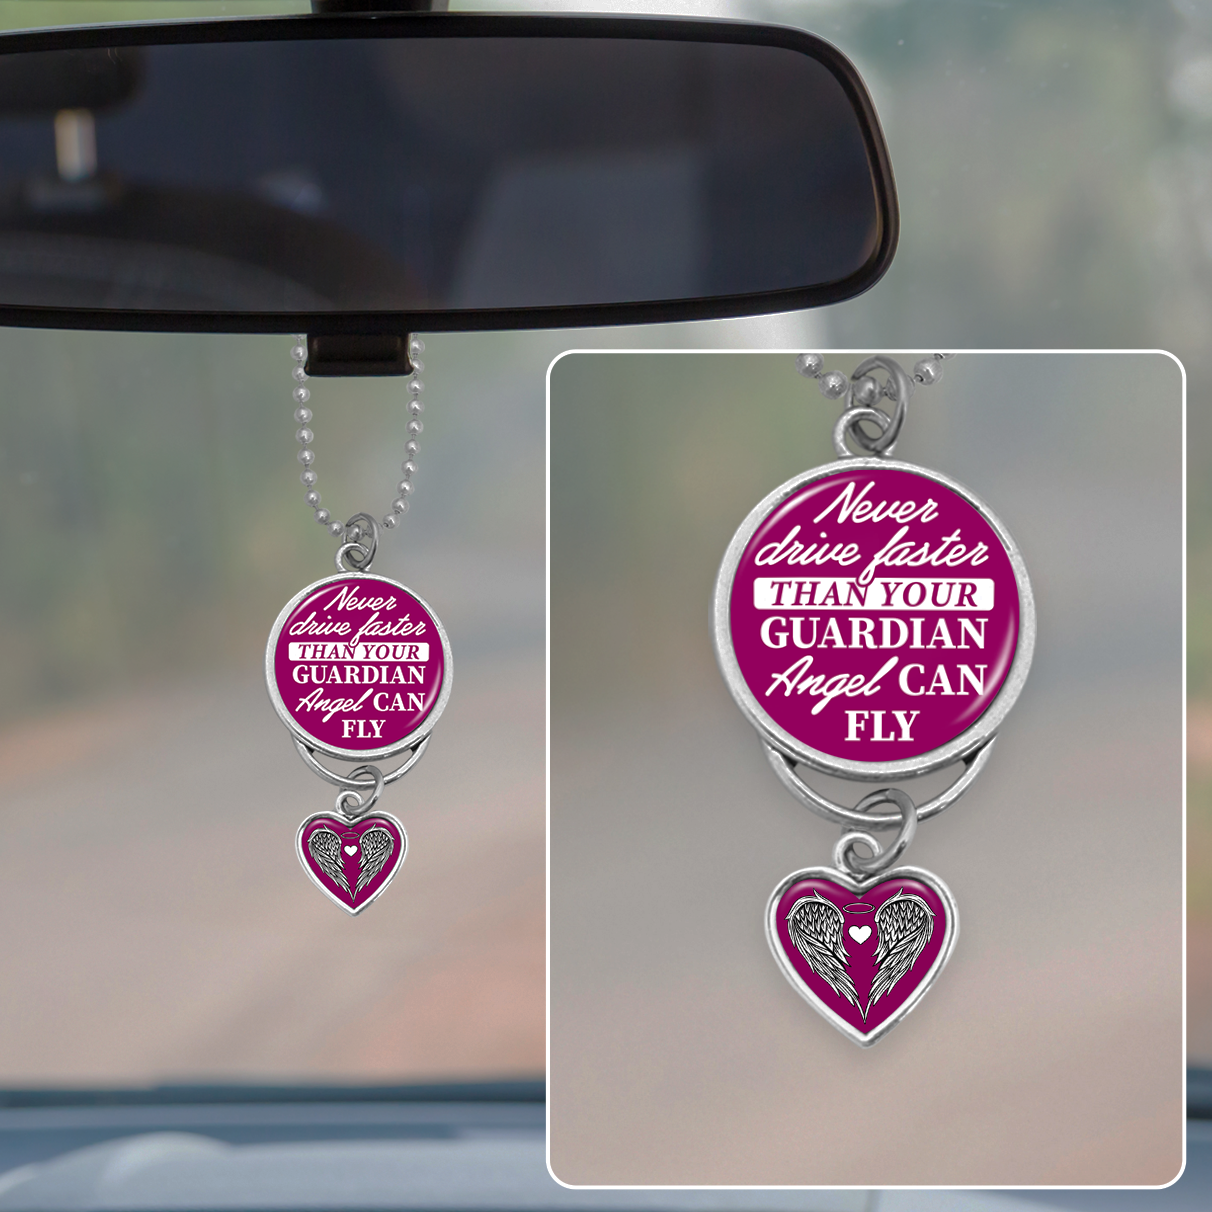 Never Drive Faster Than Your Guardian Angel Rearview Mirror Charm